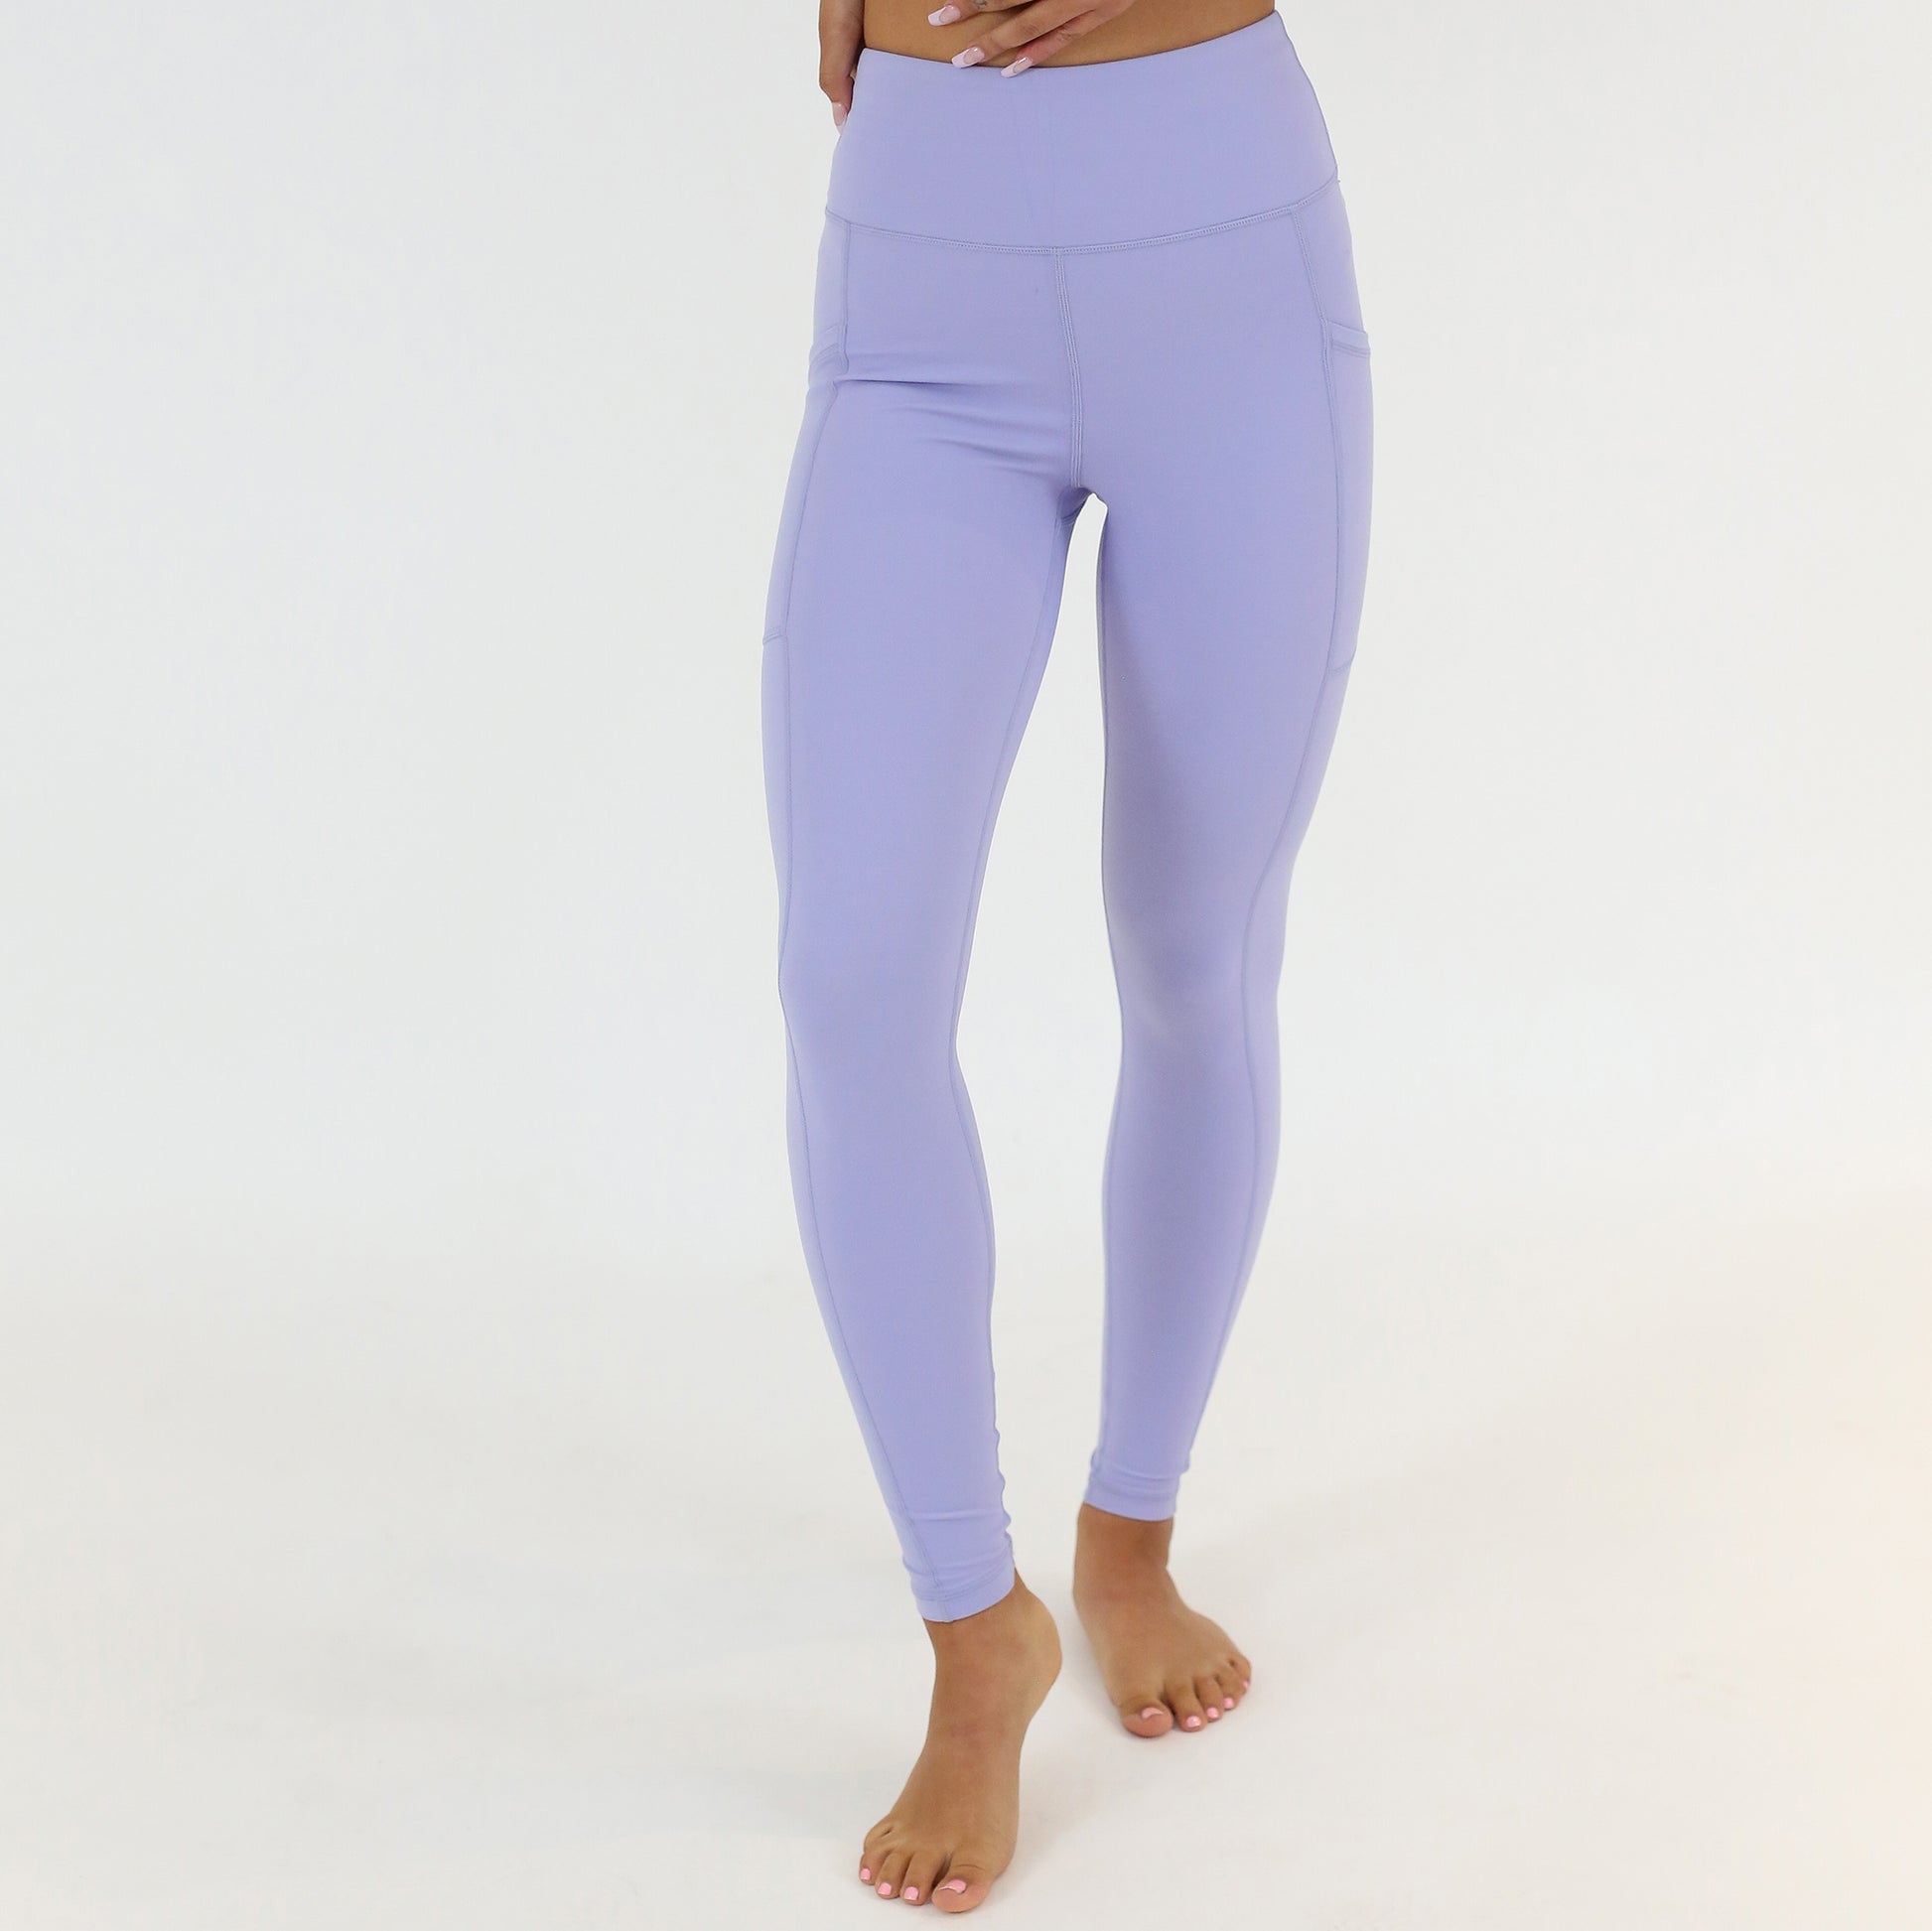 Lucy PowerMax purple cropped leggings with side pockets - $22